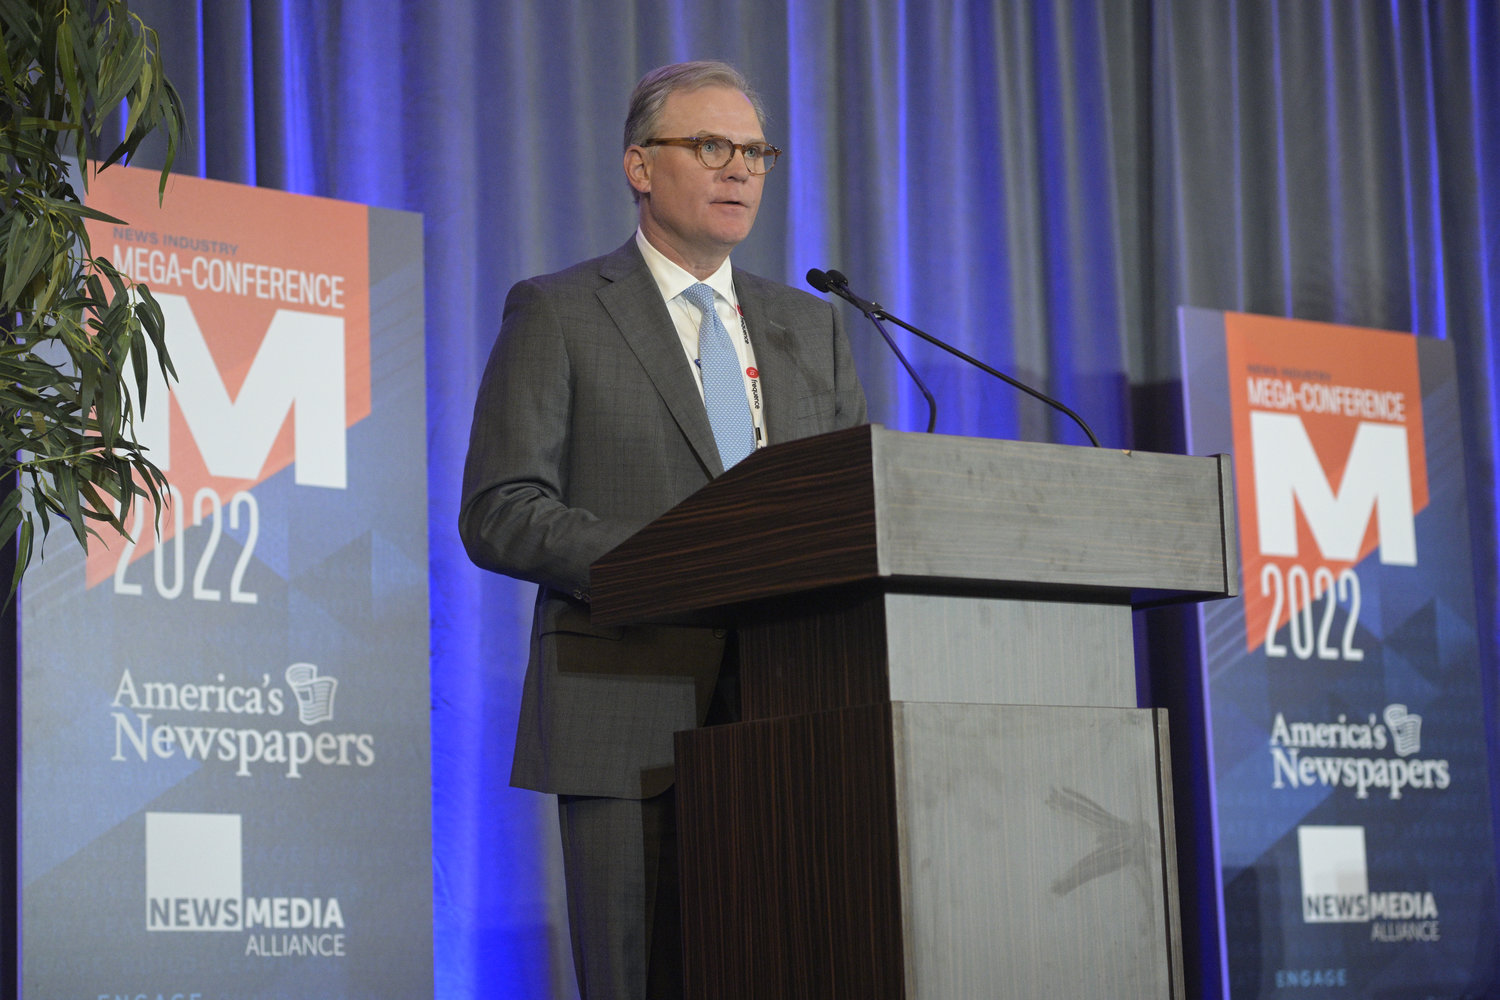 America's Newspapers President Nat Lea opened the Mega-Conference Monday morning, April 11. Lea, who is president and CEO of WEHCO Media, was happy to welcome everyone back to Mega! (Photo by Phelan M. Ebenhack)